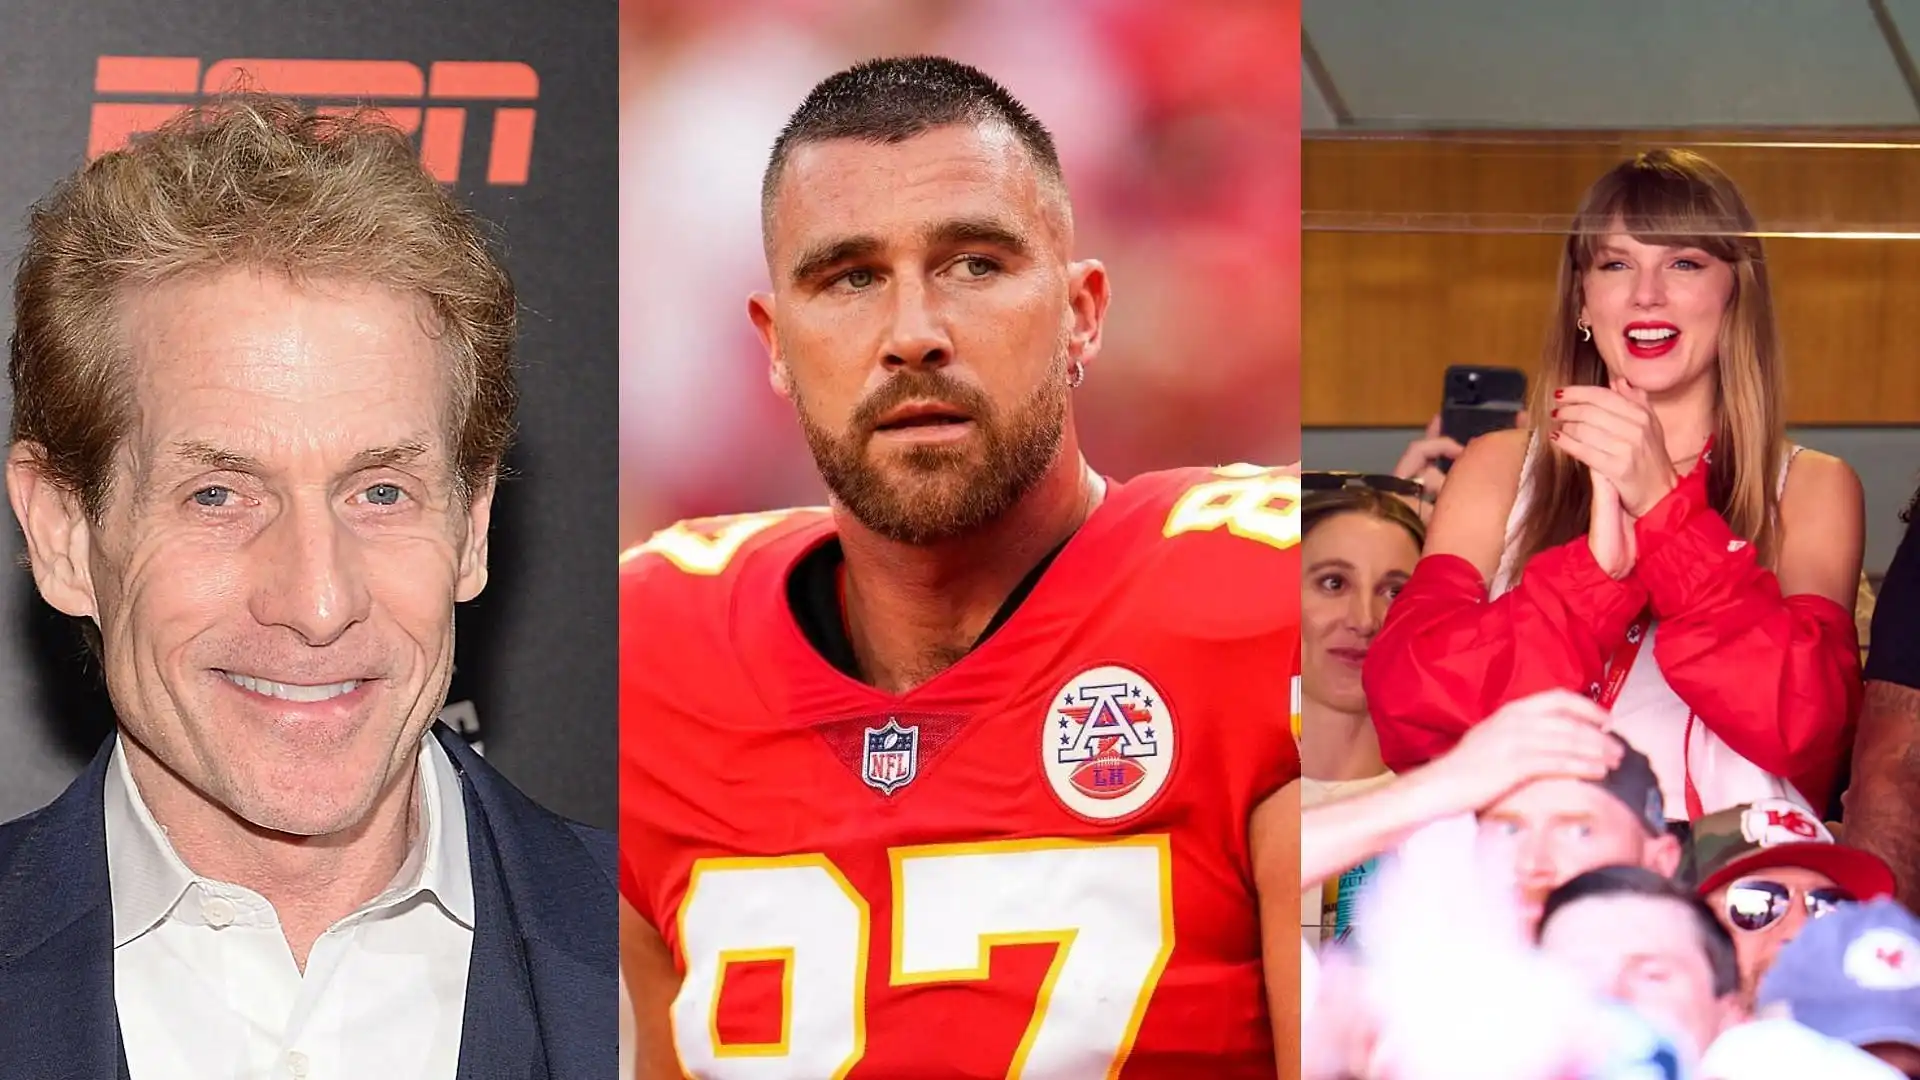 Skip Bayless criticizes Travis Kelce's partner and calls Taylor Swift a distraction